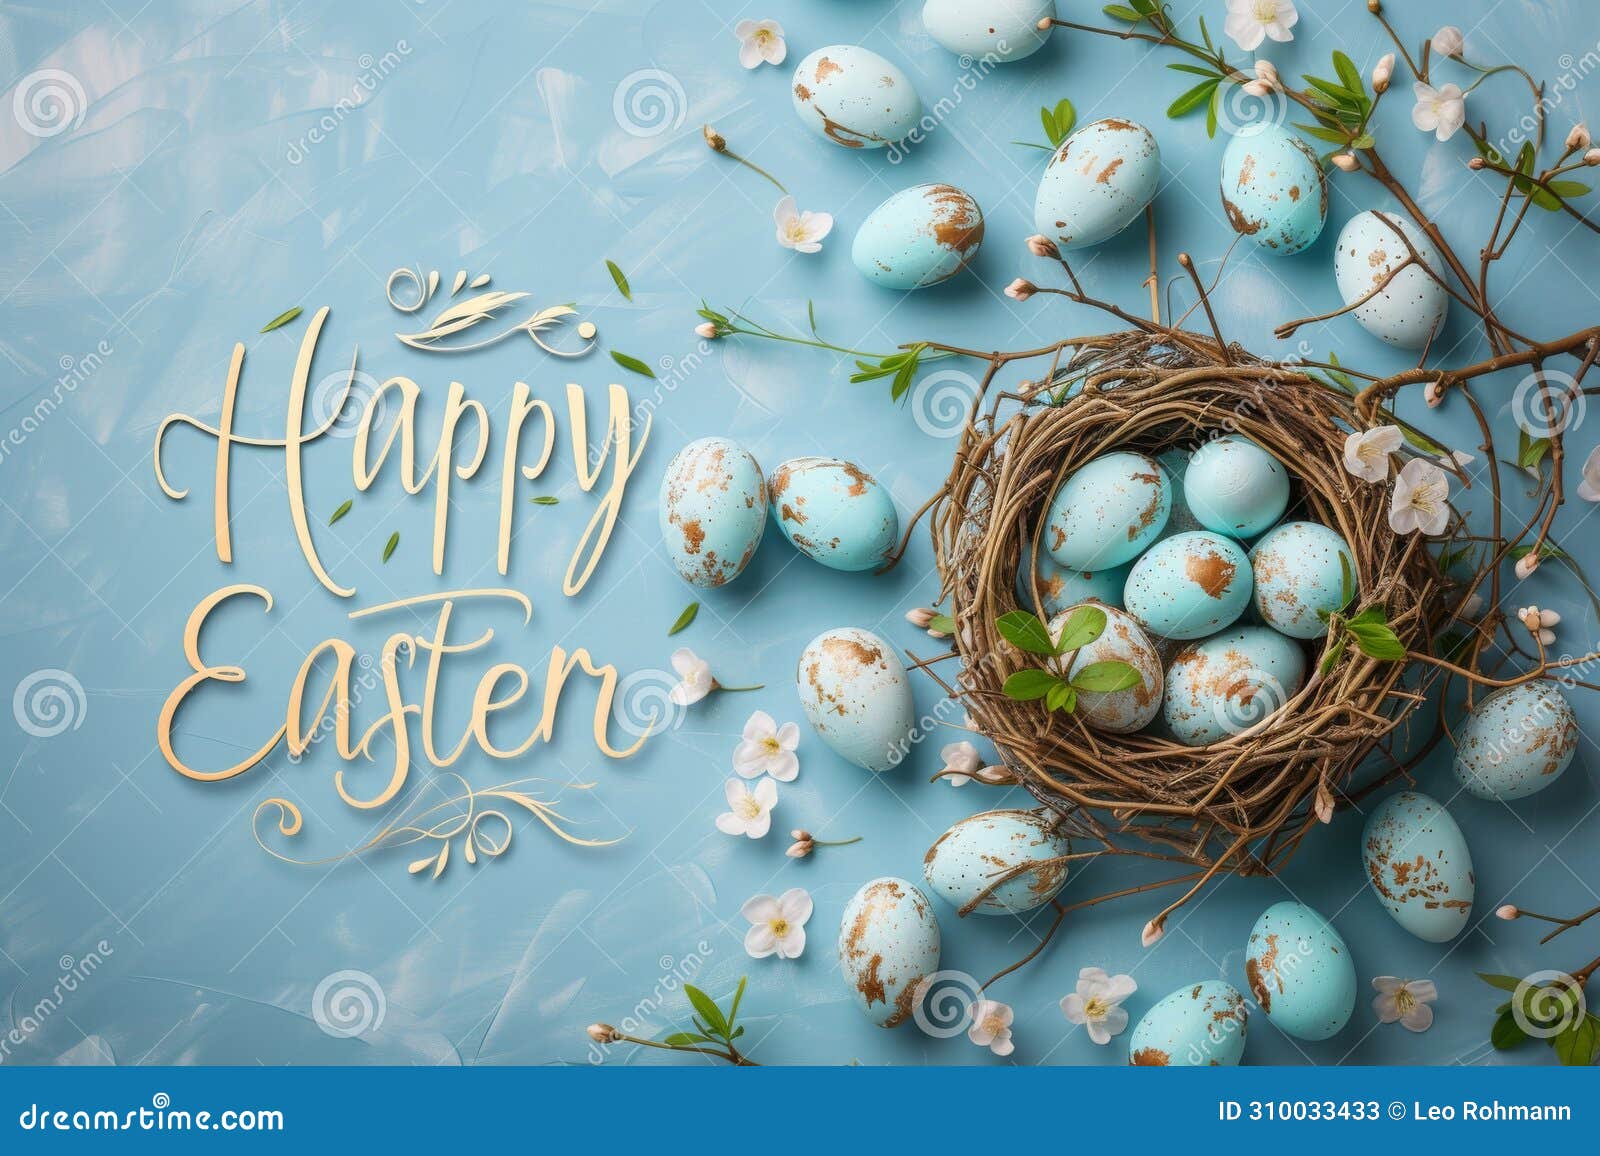 happy easter canary eggs eggstravaganza basket. white ideograph bunny figurative. easter picnic background wallpaper